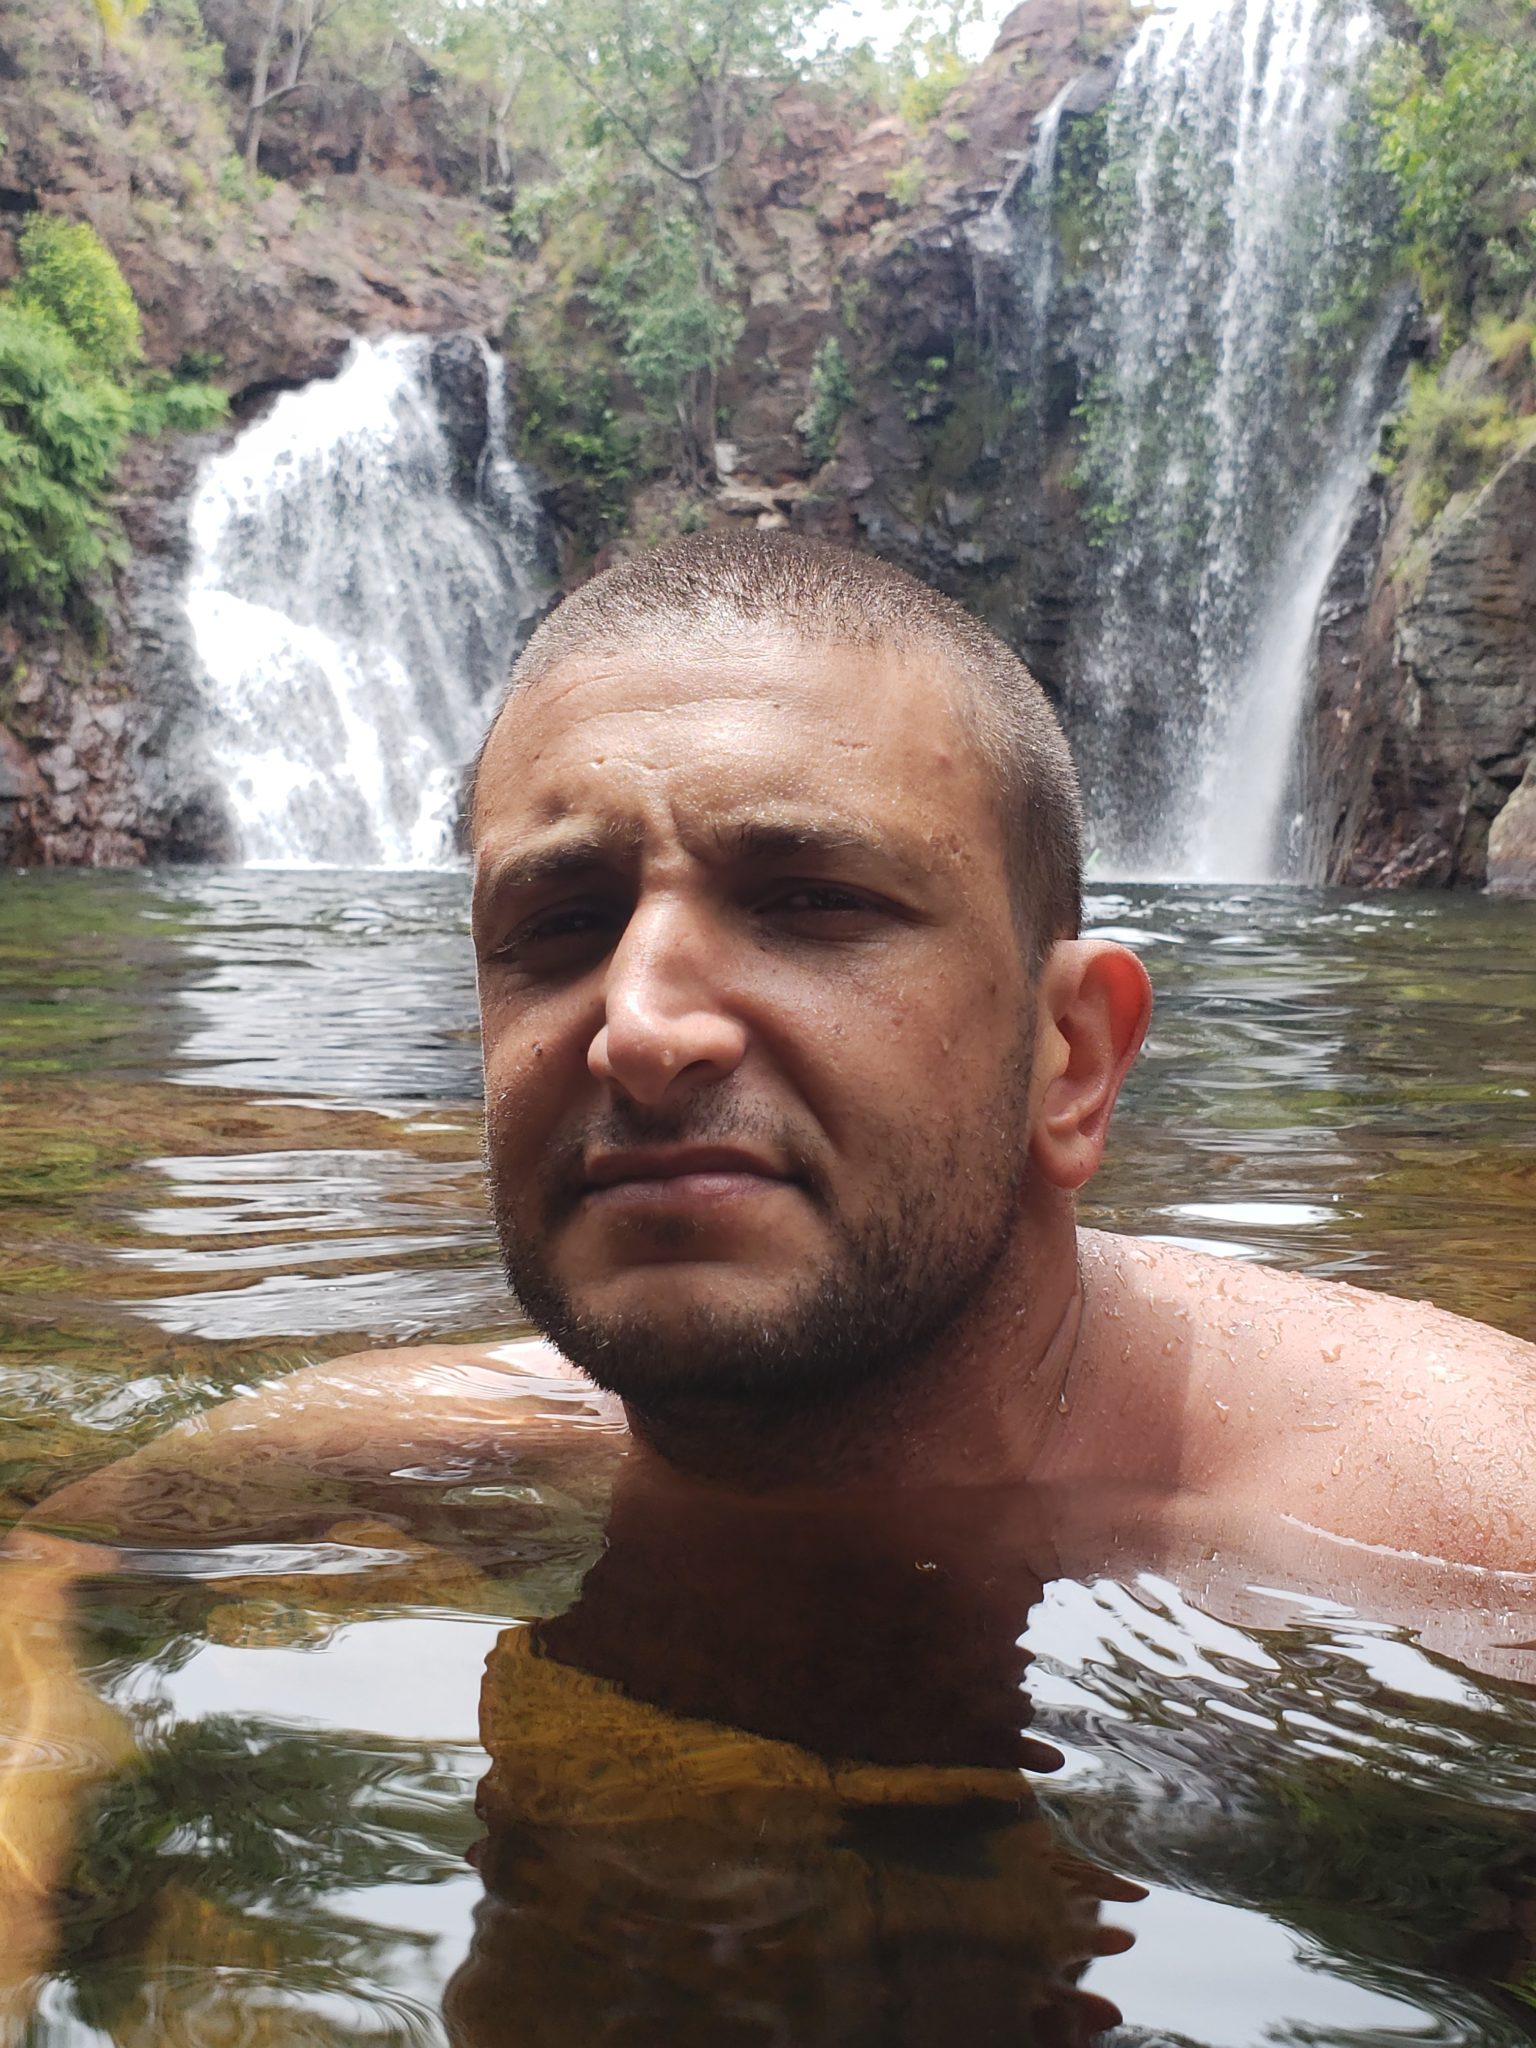 a man in water with a waterfall in the background